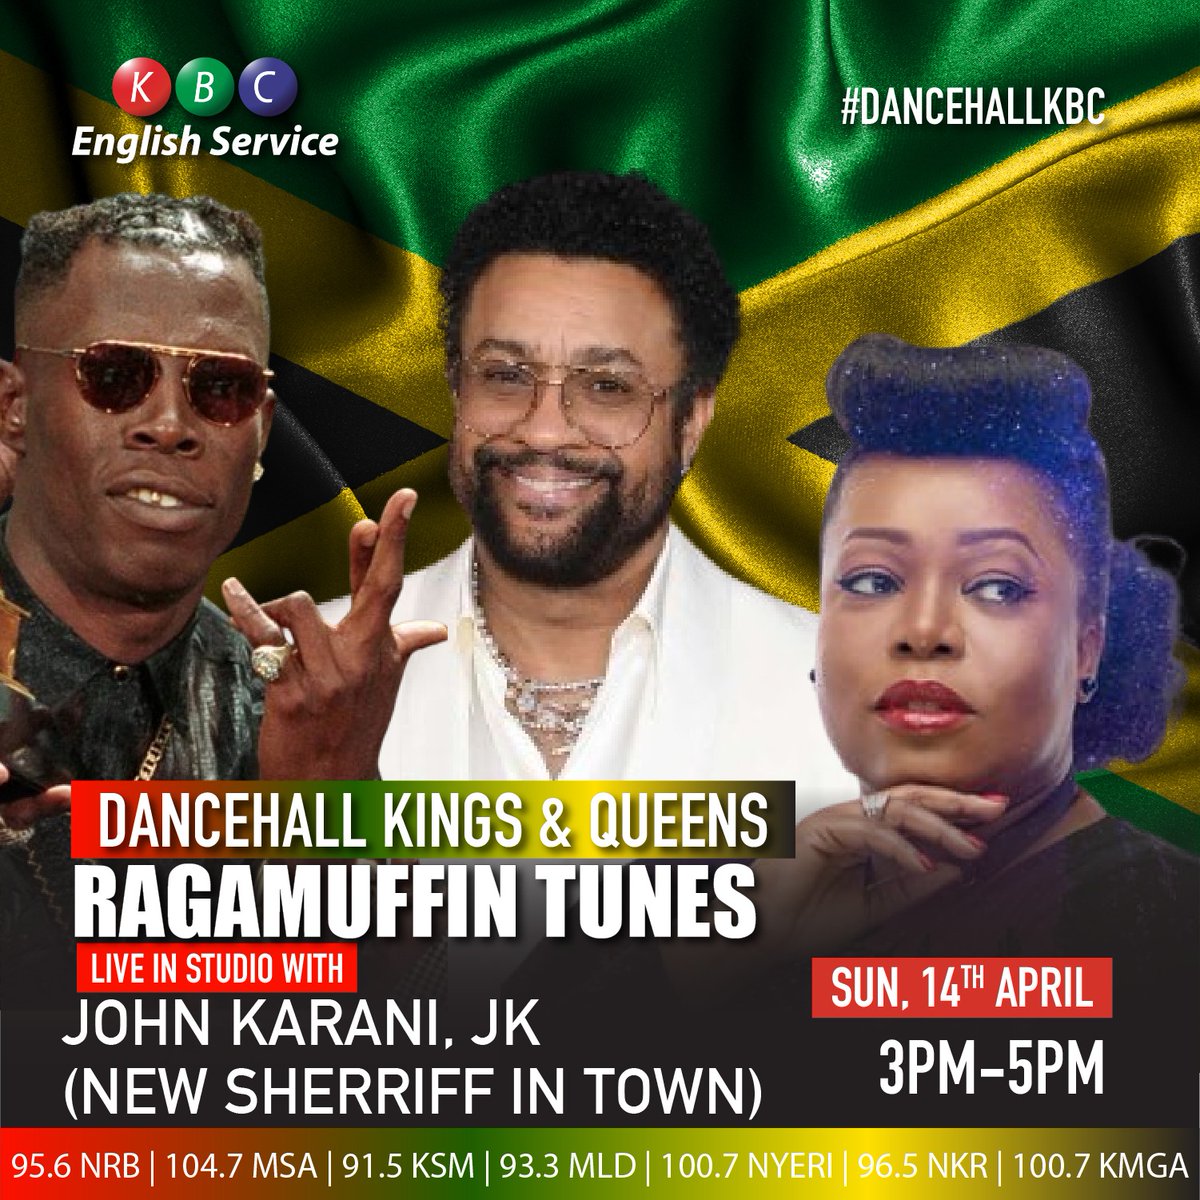 I got Shabba Ranks, Shaggy and Chevele franklin on board. Which other Ragga tunes should the New Sherriff in town John Karani JK include on the playlist? Shout out 3pm - 5pm @kbcenglish @johnkaranijk . Goodtimes are back. #DANCEHALLKBC